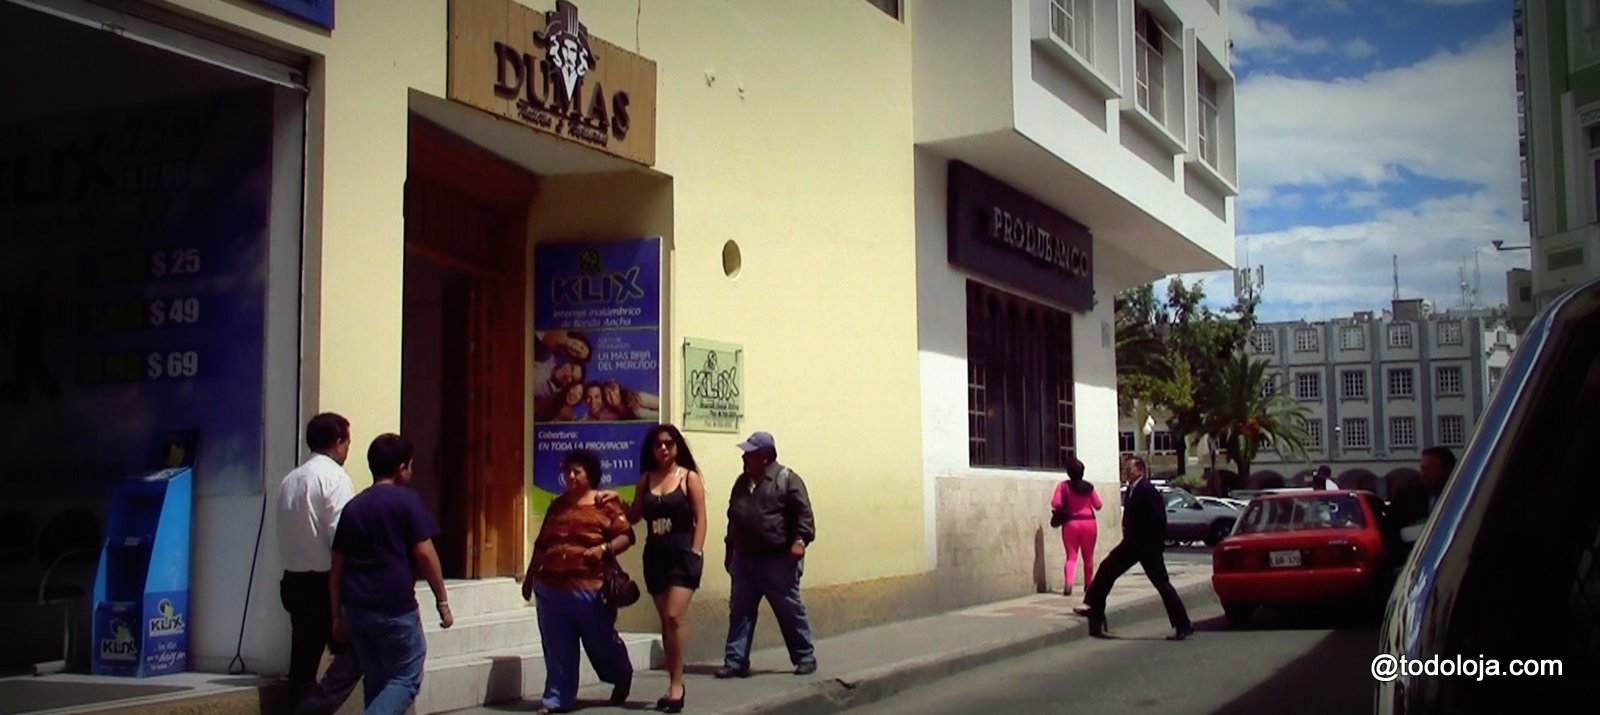 Dumas is conveniently located only a few steps from Loja central square